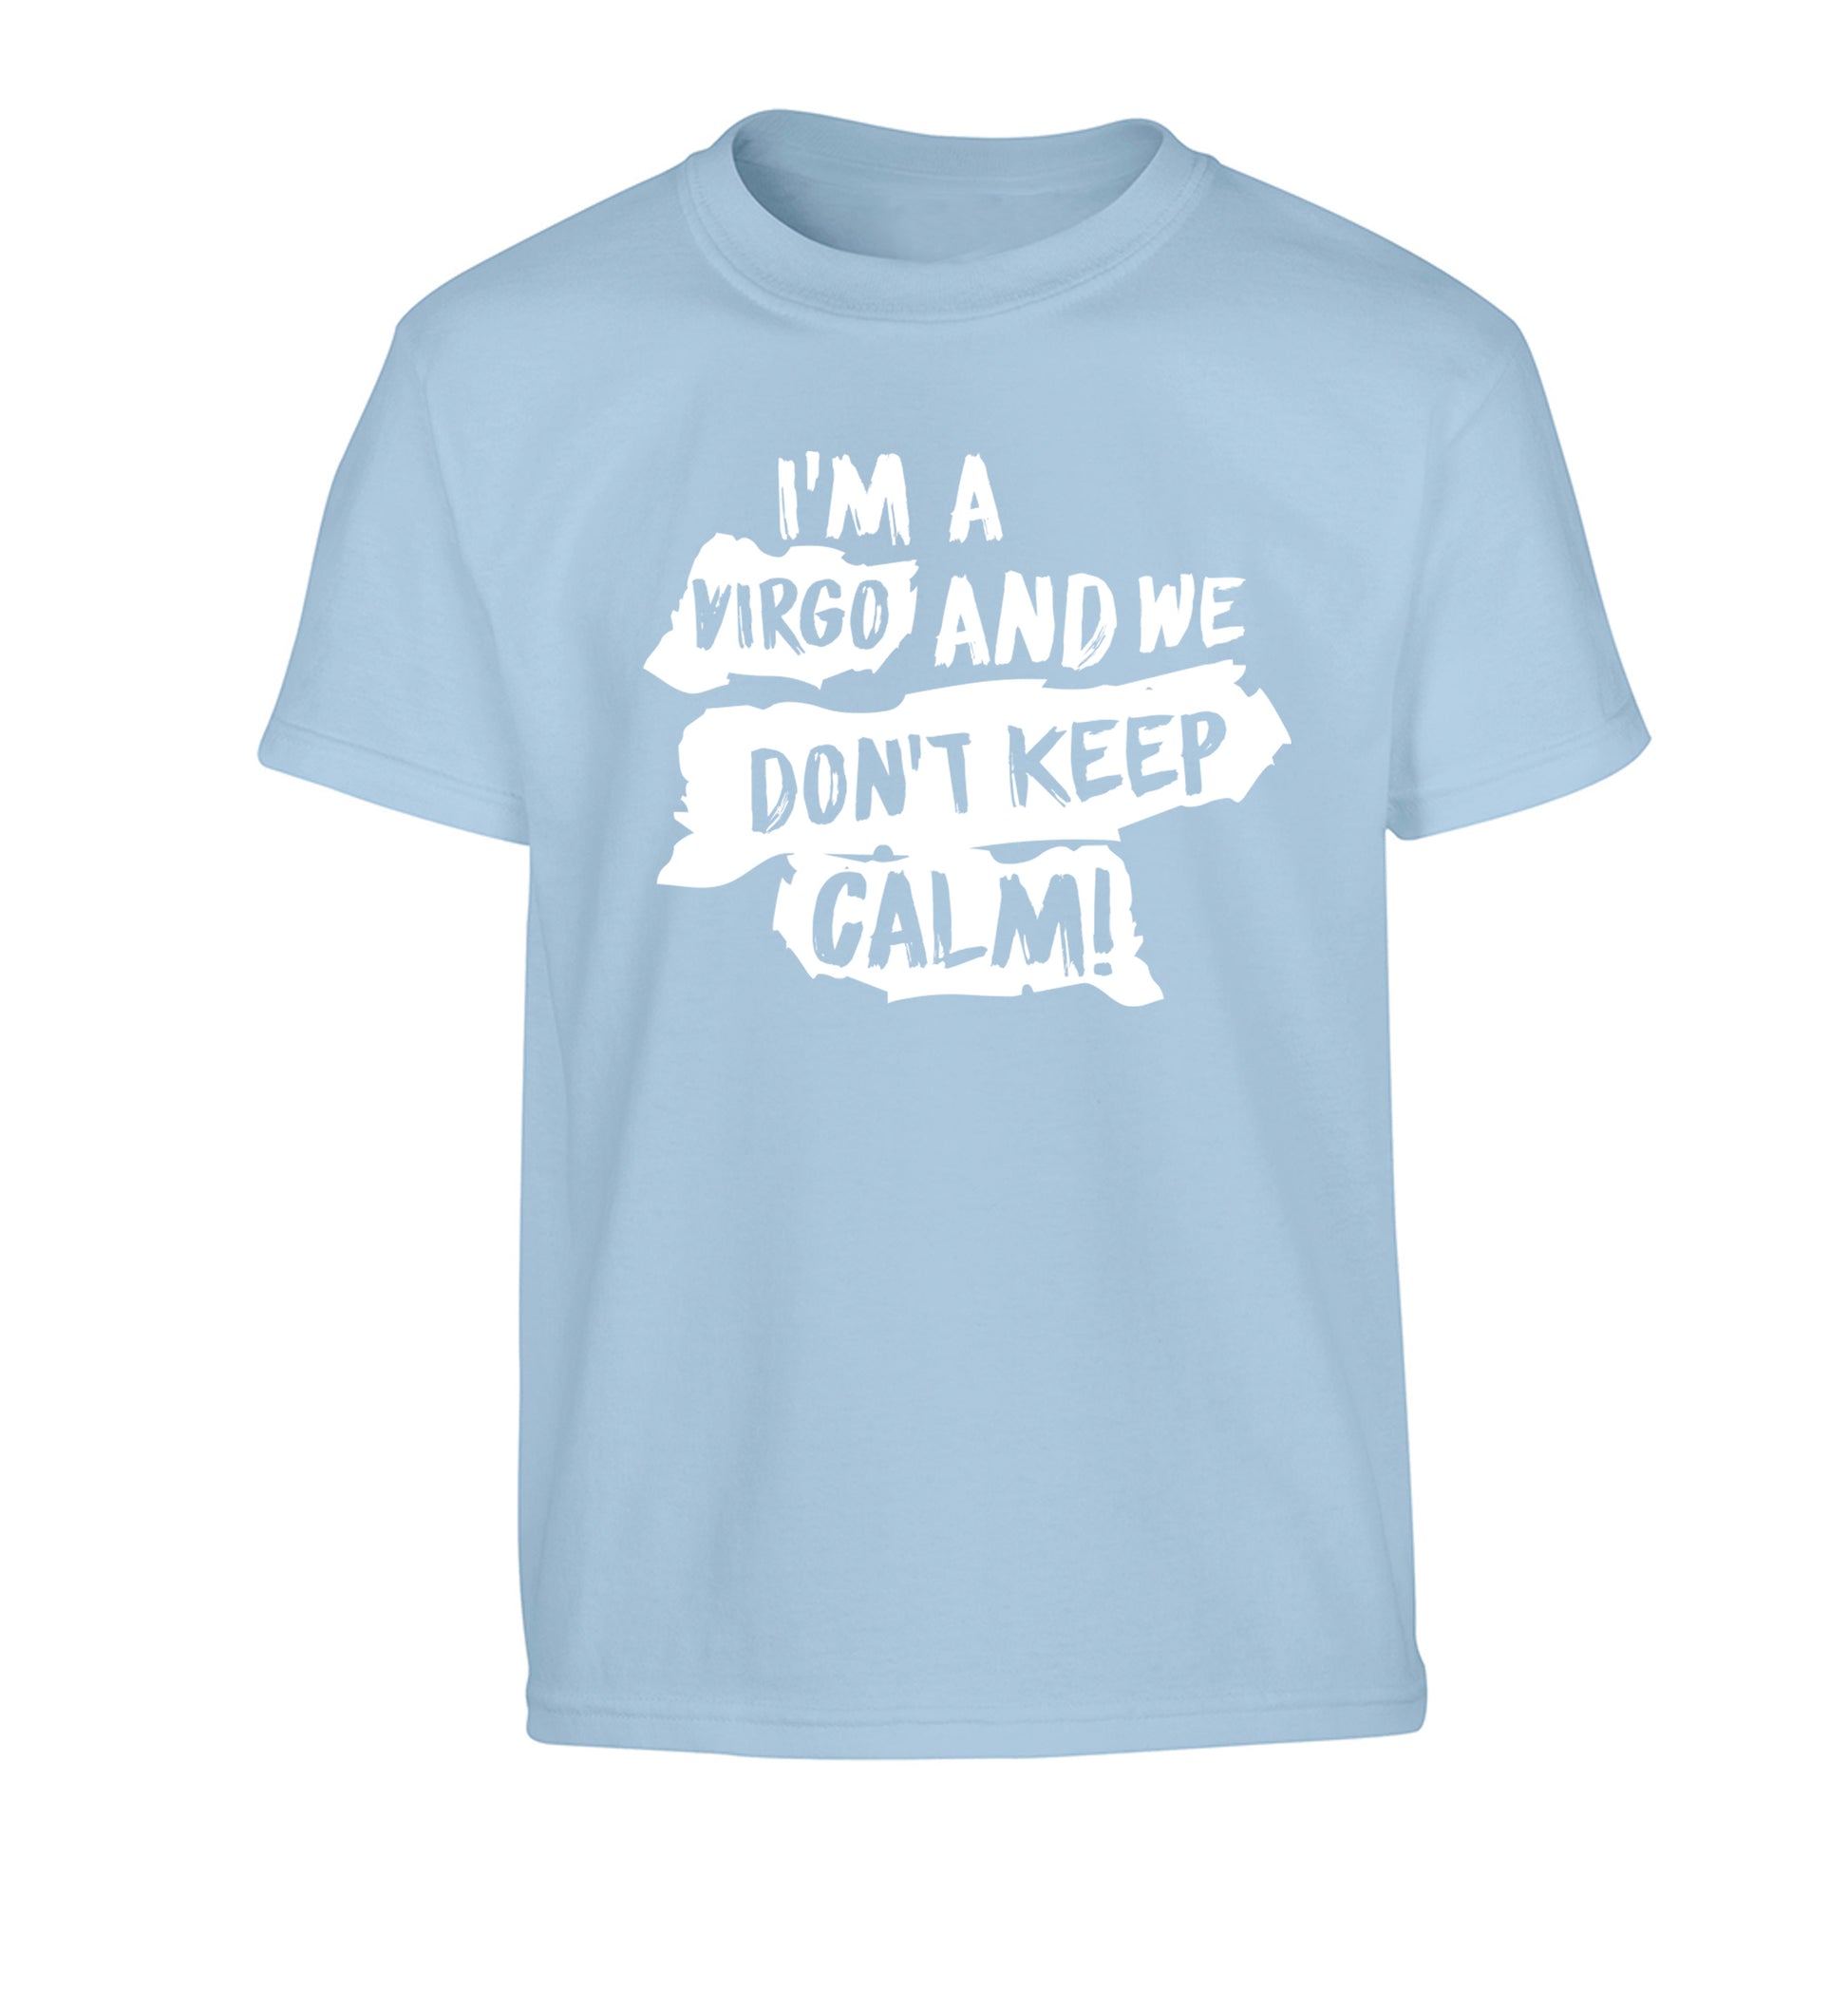 I'm a virgo and we don't keep calm Children's light blue Tshirt 12-13 Years